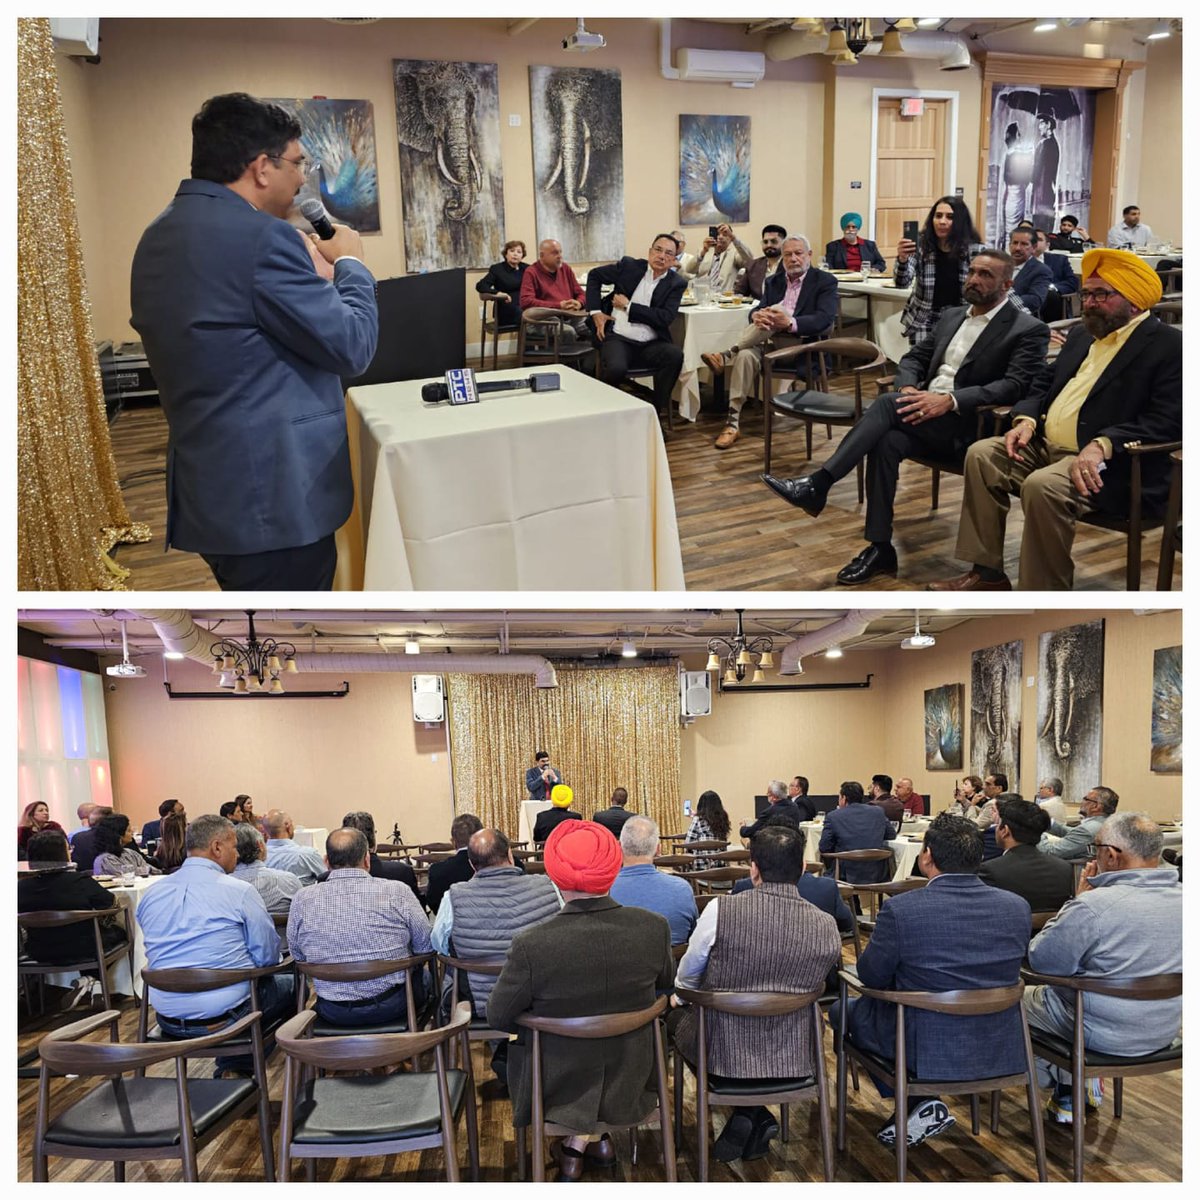 Consul General [CG] Dr. K. Srikar Reddy met with prominent members of Indian diaspora in Fresno at a welcome reception hosted by entrepreneur Jay Gill. CG invited them to be part of India's growth story and it's desire to become a developed country @2047. Fresno is home to around…